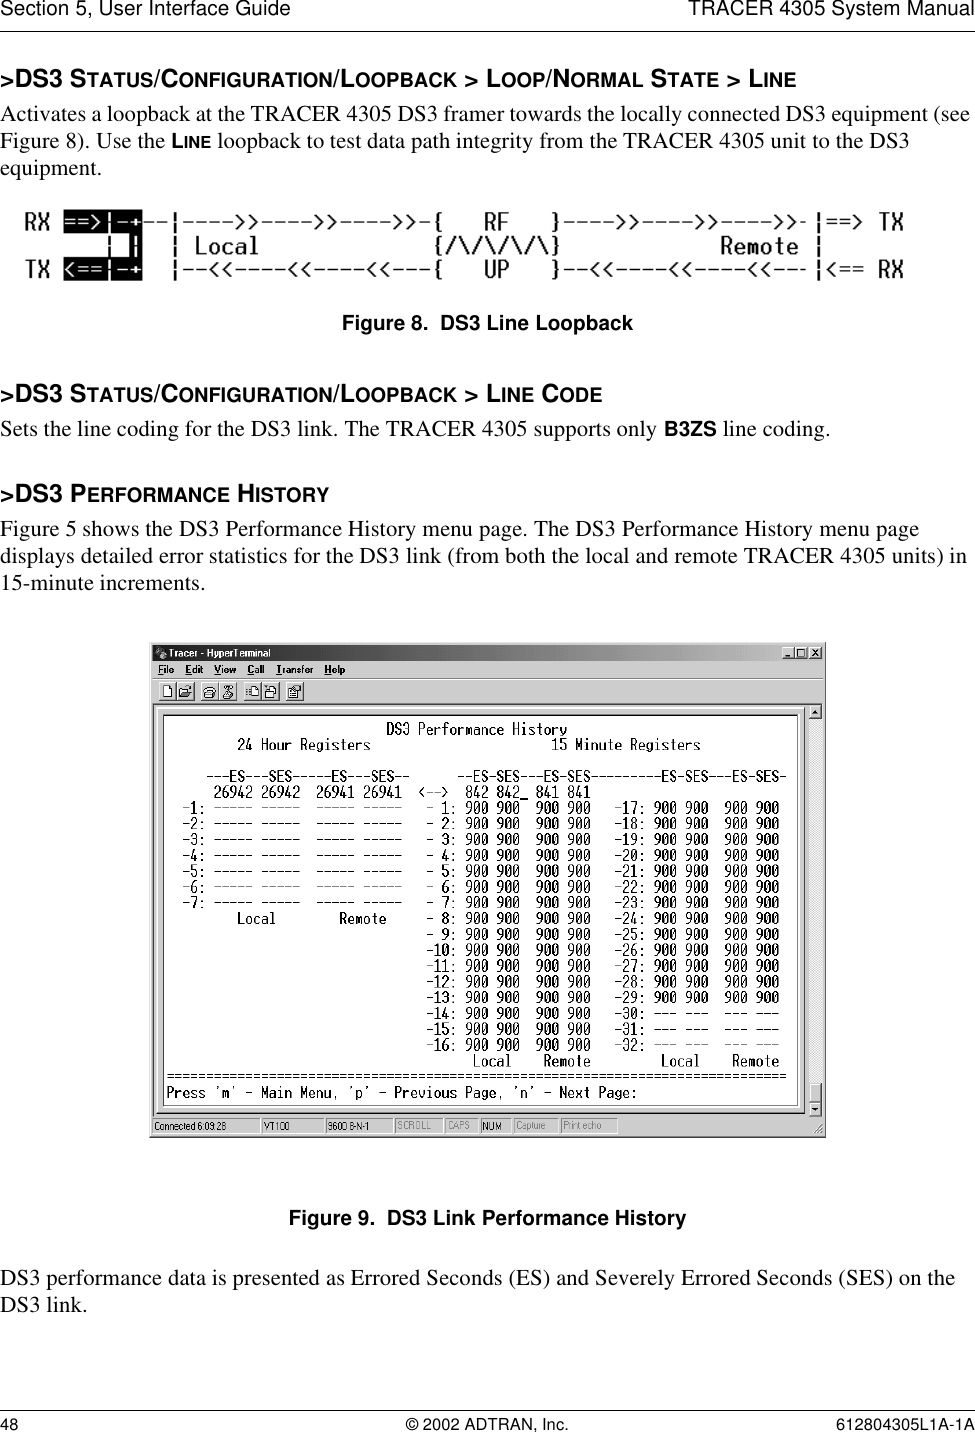 Section 5, User Interface Guide TRACER 4305 System Manual48 © 2002 ADTRAN, Inc. 612804305L1A-1A&gt;DS3 STATUS/CONFIGURATION/LOOPBACK &gt; LOOP/NORMAL STATE &gt; LINEActivates a loopback at the TRACER 4305 DS3 framer towards the locally connected DS3 equipment (see Figure 8). Use the LINE loopback to test data path integrity from the TRACER 4305 unit to the DS3 equipment.Figure 8.  DS3 Line Loopback&gt;DS3 STATUS/CONFIGURATION/LOOPBACK &gt; LINE CODESets the line coding for the DS3 link. The TRACER 4305 supports only B3ZS line coding.&gt;DS3 PERFORMANCE HISTORYFigure 5 shows the DS3 Performance History menu page. The DS3 Performance History menu page displays detailed error statistics for the DS3 link (from both the local and remote TRACER 4305 units) in 15-minute increments. Figure 9.  DS3 Link Performance HistoryDS3 performance data is presented as Errored Seconds (ES) and Severely Errored Seconds (SES) on the DS3 link.